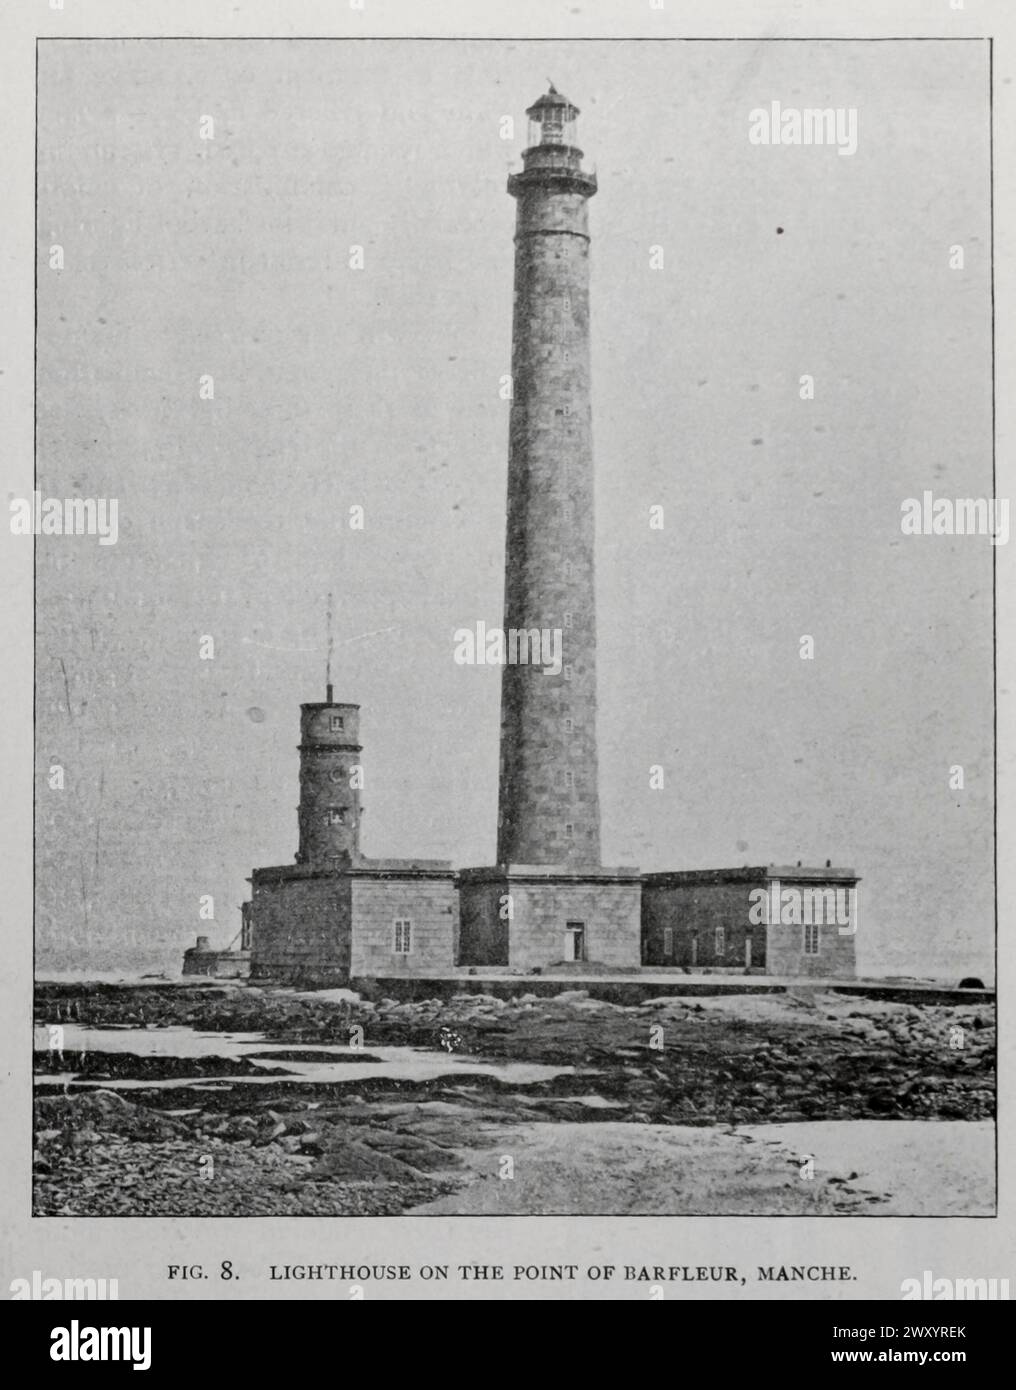 LIGHTHOUSE ON THE POINT OF BARFLEUR, MANCHE. from the Article THE LATEST IMPROVEMENTS IN THE FRENCH LIGHTHOUSE SYSTEM. By Jacques Boyer. from The Engineering Magazine Devoted to Industrial Progress Volume XVI October 1898 - March 1899 The Engineering Magazine Co Stock Photo